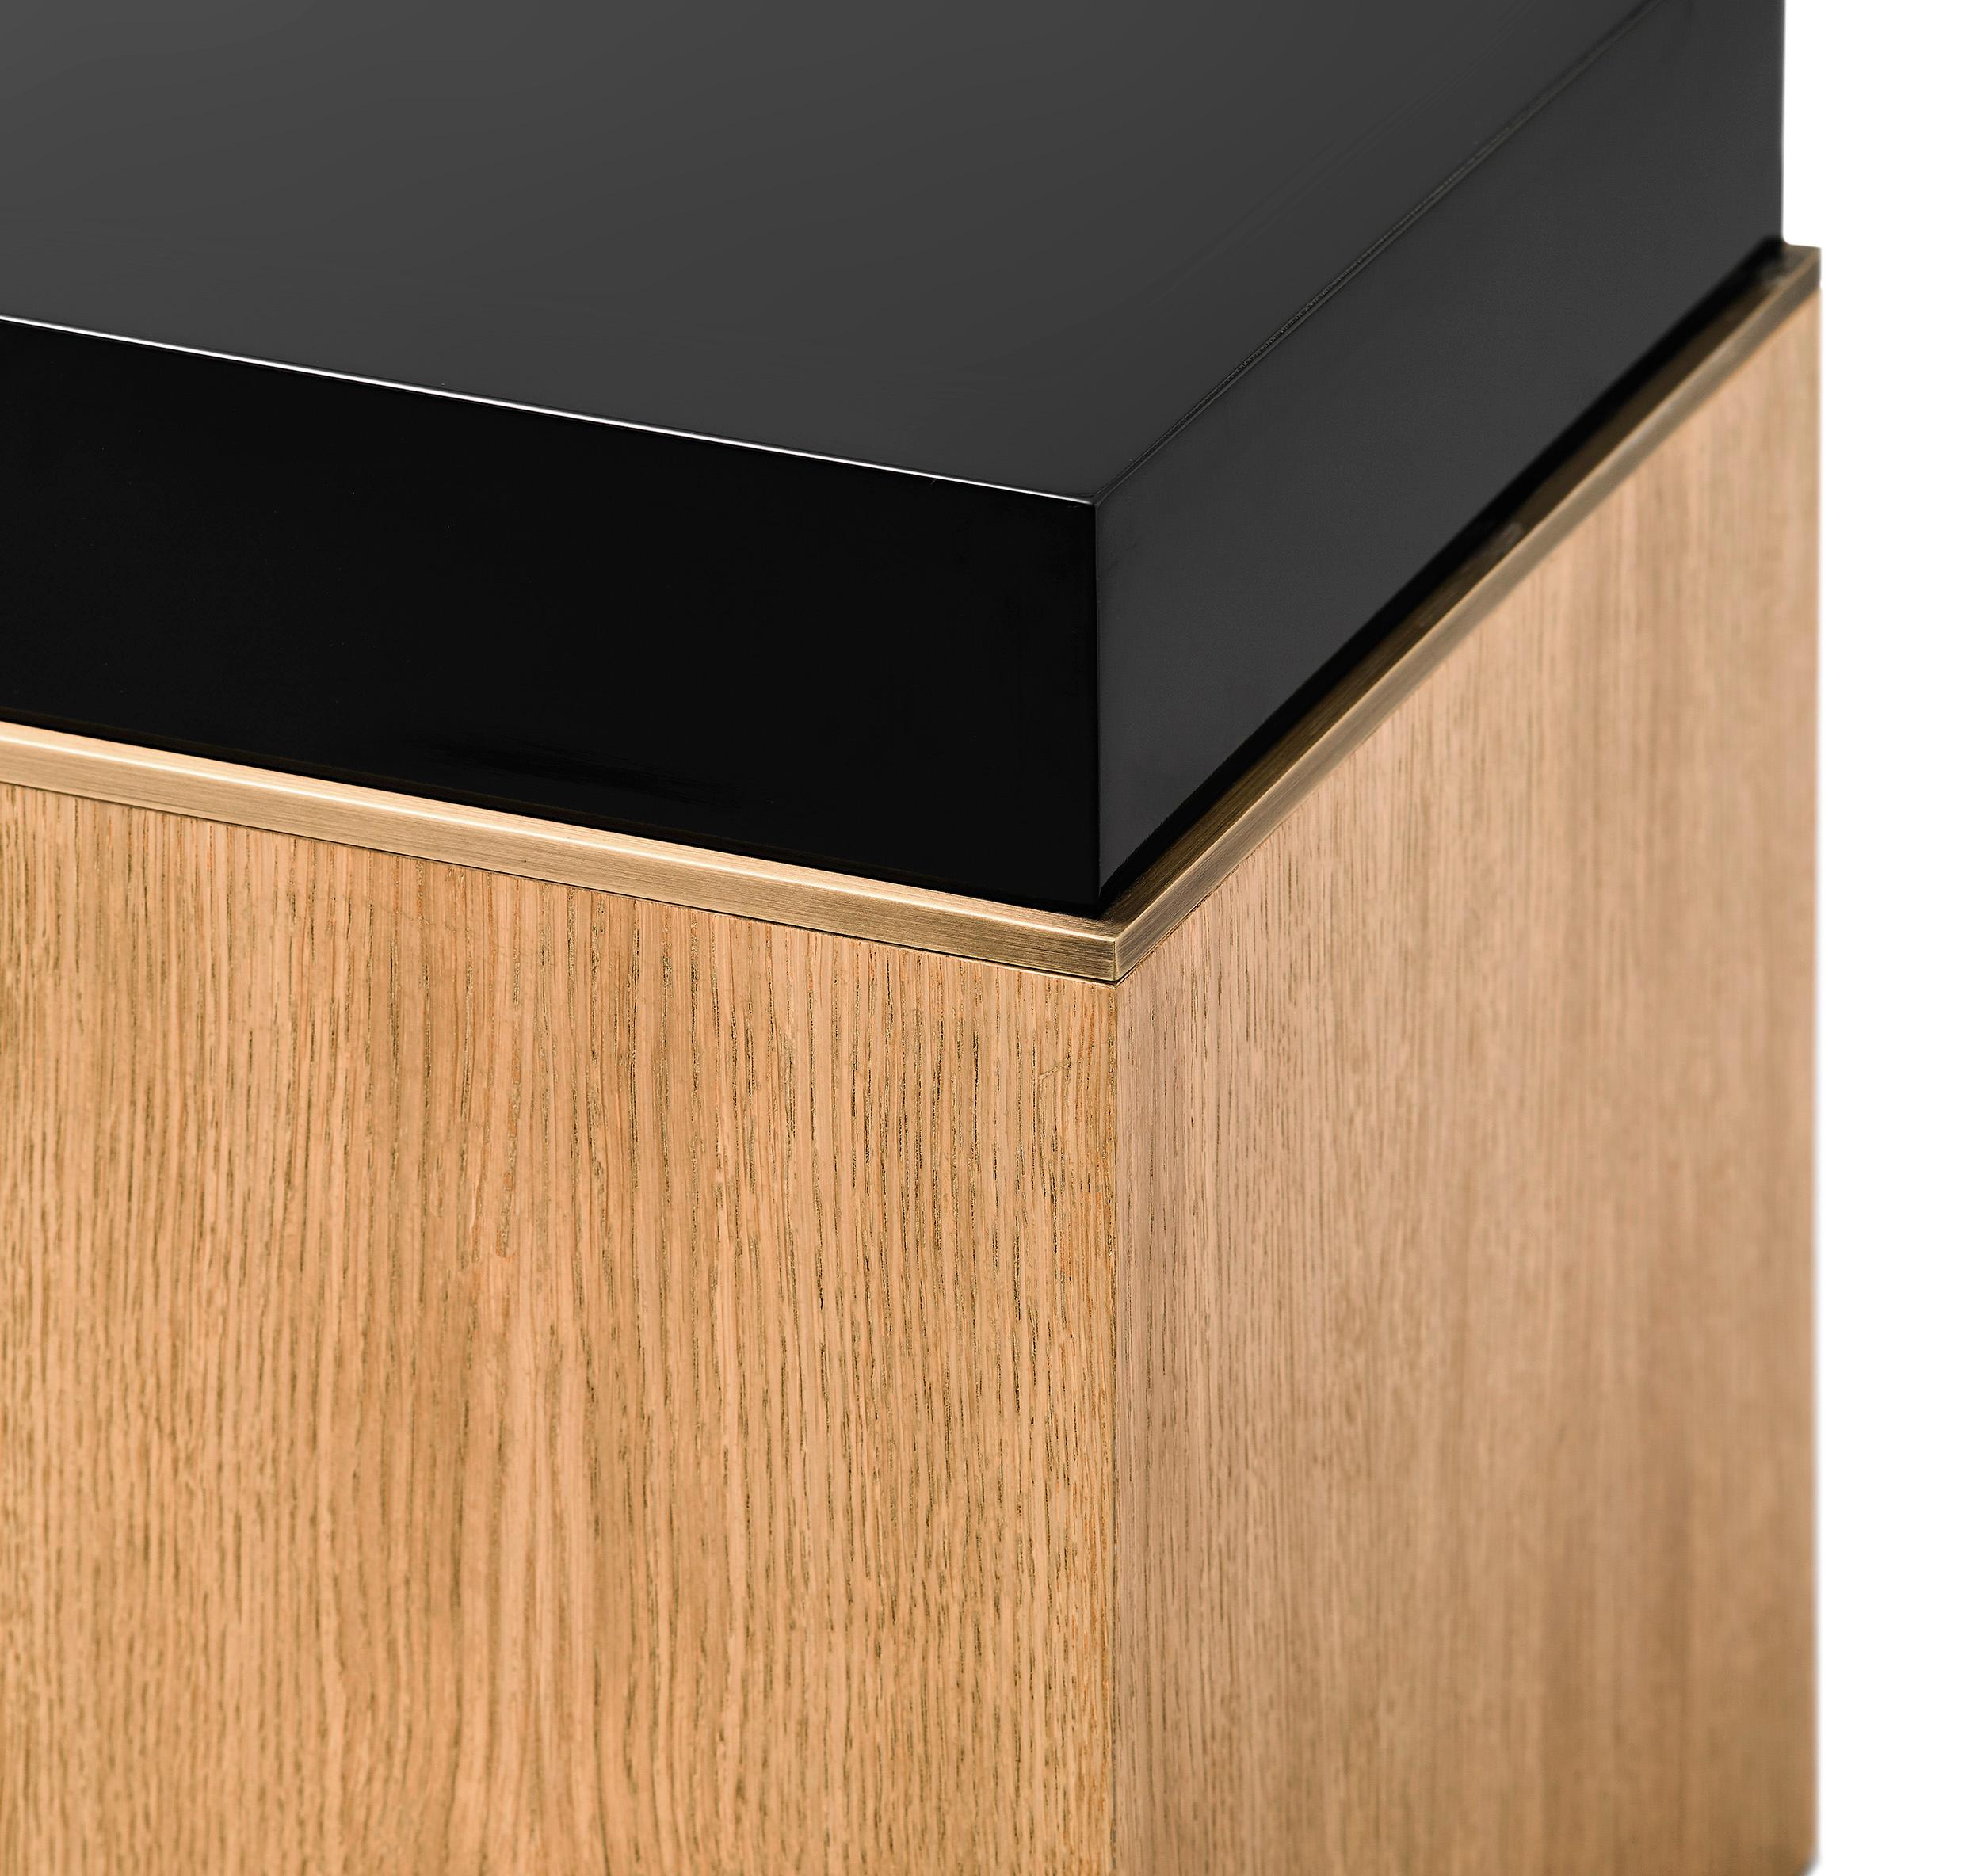 Block Side Table, in Limed Oak, Handcrafted in Portugal by Duistt

The block side table is a strong masculine piece, composed of simplistic clean lines, allowing for a variety of finishes. The gold limed oak creates a contrast against the high gloss